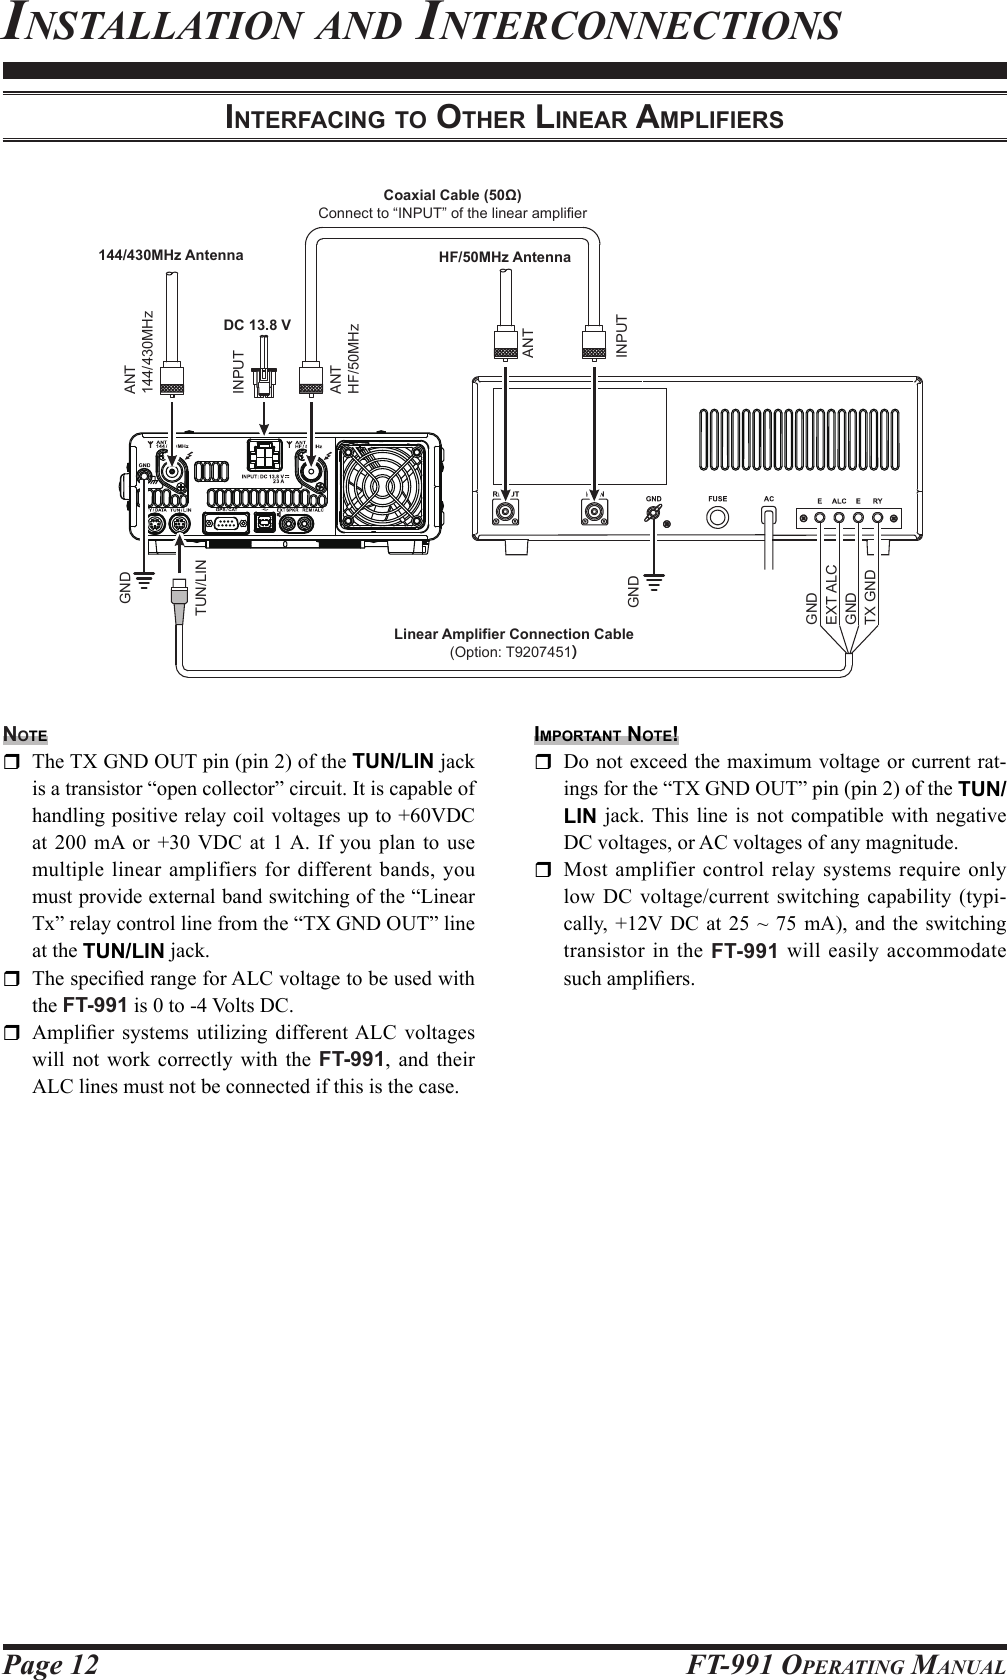 Page 12 FT-991 OperaTing ManualinsTallaTion and inTerConneCTionsinterFAcing to other lineAr AMpliFierSnote  The TX GND OUT pin (pin 2) of the TUN/LIN jack is a transistor “open collector” circuit. It is capable of handling positive relay coil voltages up to +60VDC at 200 mA or +30 VDC at 1 A. If you plan to use multiple linear amplifiers for different bands, you must provide external band switching of the “Linear Tx” relay control line from the “TX GND OUT” line at the TUN/LIN jack.  The specied range for ALC voltage to be used with the FT-991 is 0 to -4 Volts DC.  Amplier  systems utilizing  different ALC  voltages will not work correctly with the FT-991, and their ALC lines must not be connected if this is the case.iMportAnt note!  Do not exceed the maximum voltage or current rat-ings for the “TX GND OUT” pin (pin 2) of the TUN/LIN jack. This line is not compatible with negative DC voltages, or AC voltages of any magnitude.  Most amplifier control relay systems require only low DC voltage/current switching capability (typi-cally, +12V DC at 25 ~ 75 mA), and the switching transistor in the FT-991 will easily accommodate such ampliers.DC 13.8 VLinear Amplifier Connection Cable(Option: T9207451)144/430MHz Antenna HF/50MHz AntennaCoaxial Cable (50Ω)Connect to “INPUT” of the linear amplifierINPUTTUN/LINGNDGNDGNDTX GNDEXT ALCGNDINPUTANTANT144/430MHzANTHF/50MHz